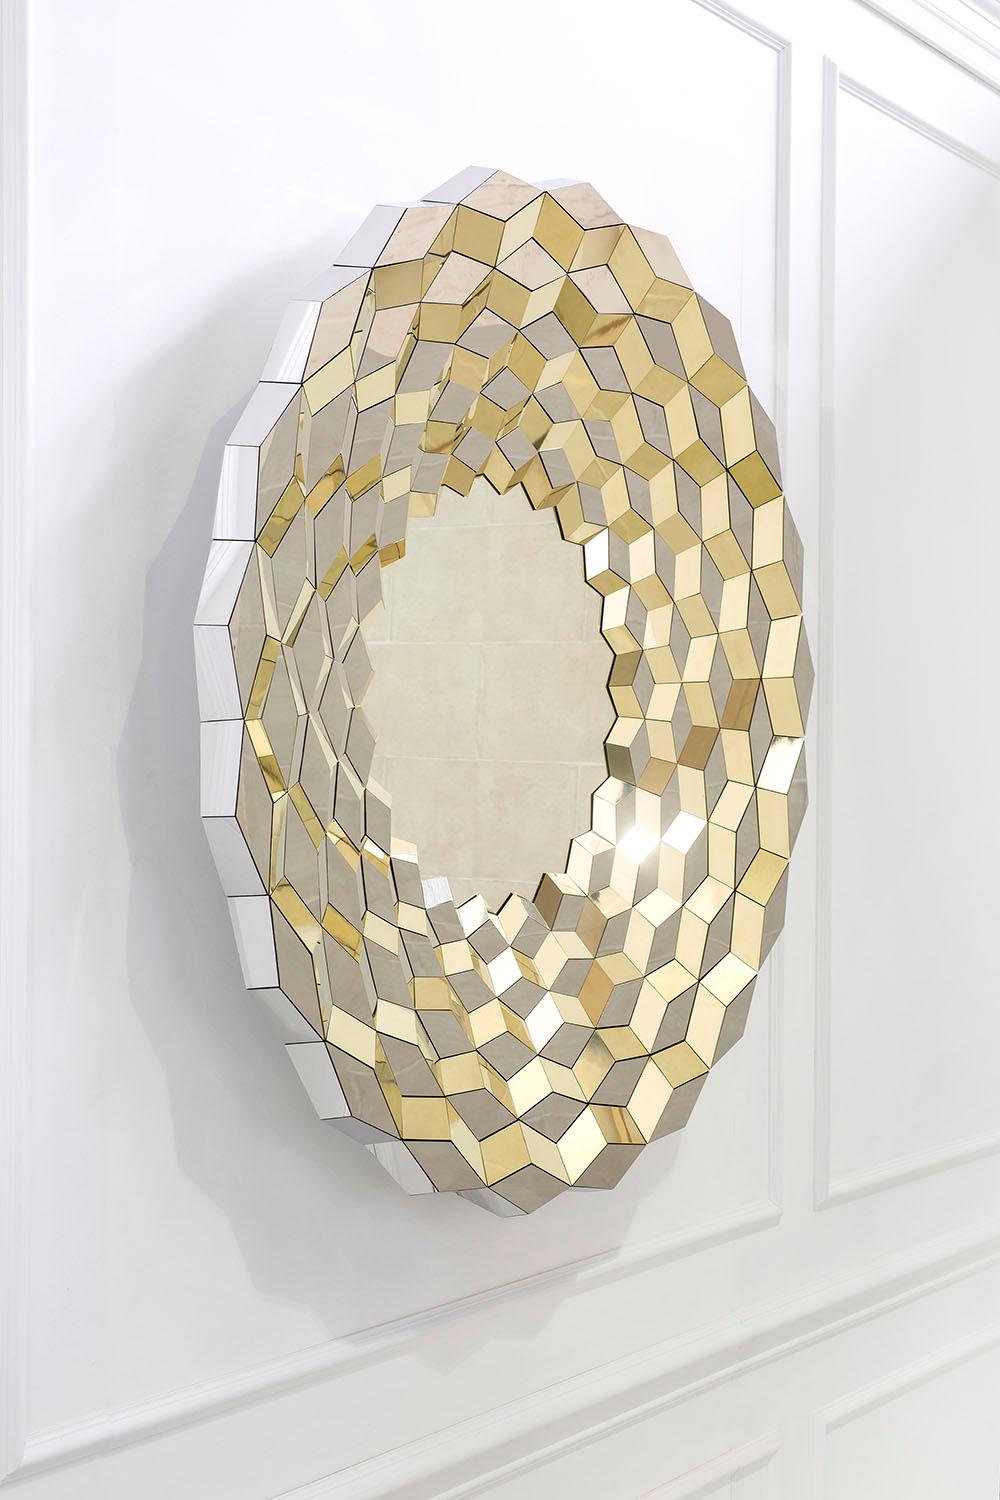 Of all things, a long haul flight to China helped inspire this faceted mirror. When seen from the air, the still water that had been collected in hundreds of terraced paddy fields, cut deep into the valley sides, caught the early morning light